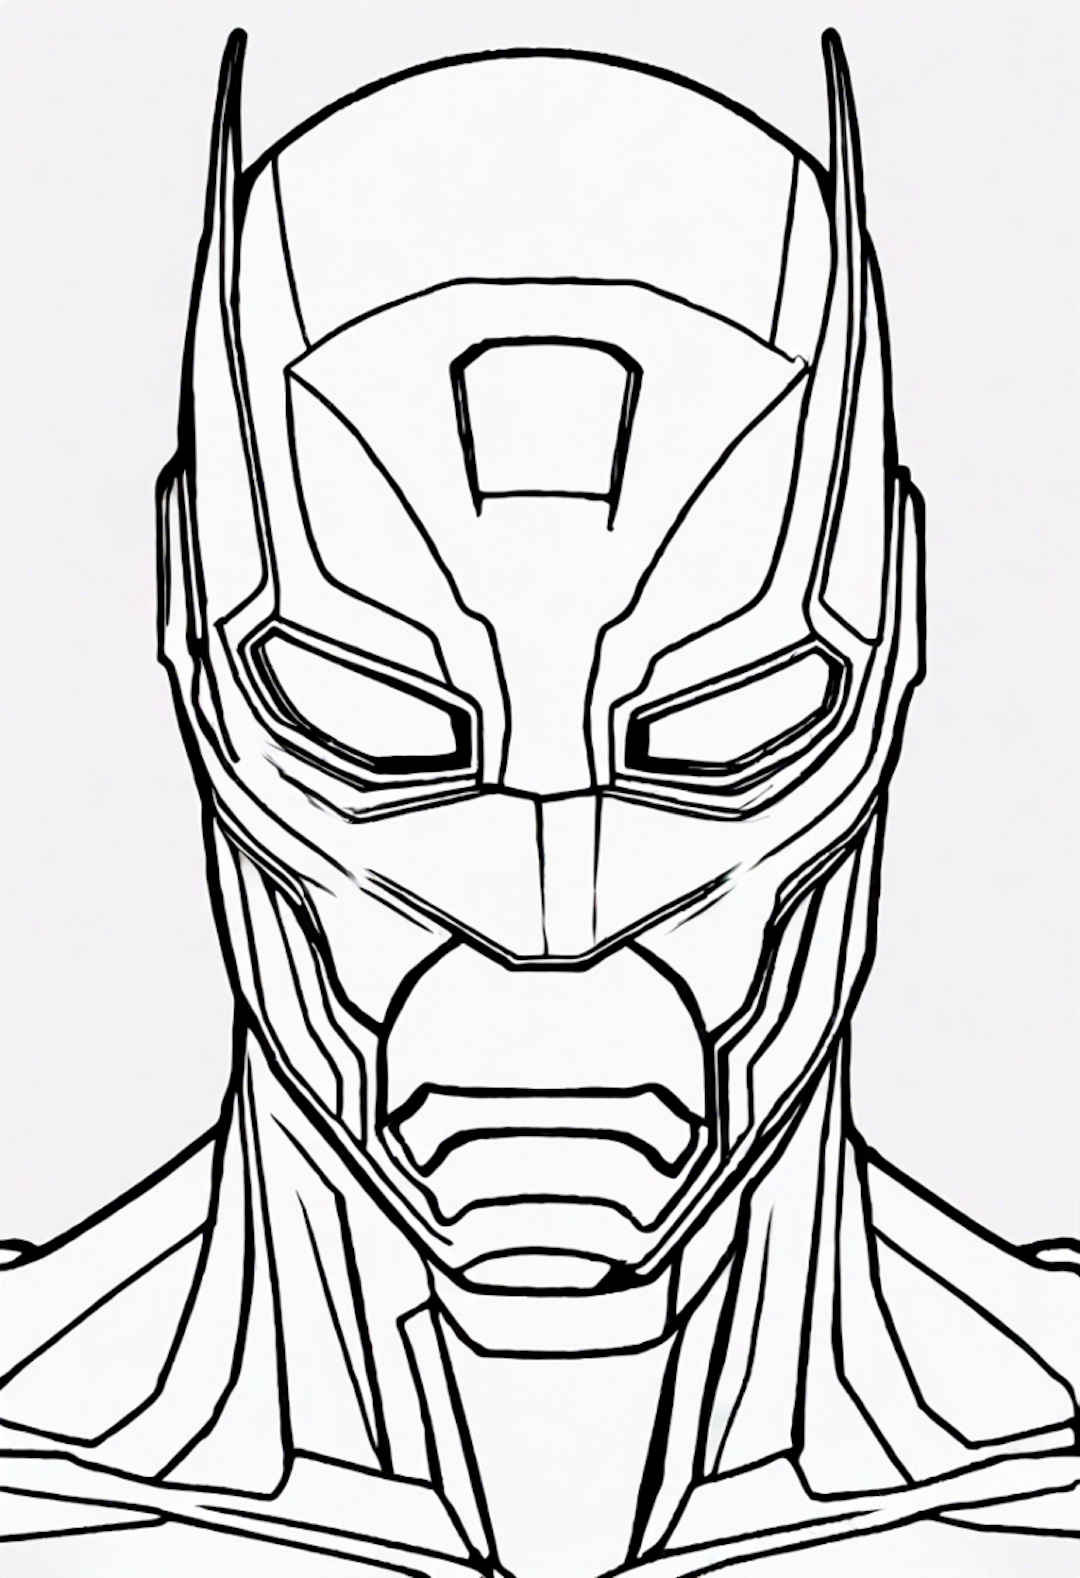 Vision, the Avenger coloring pages